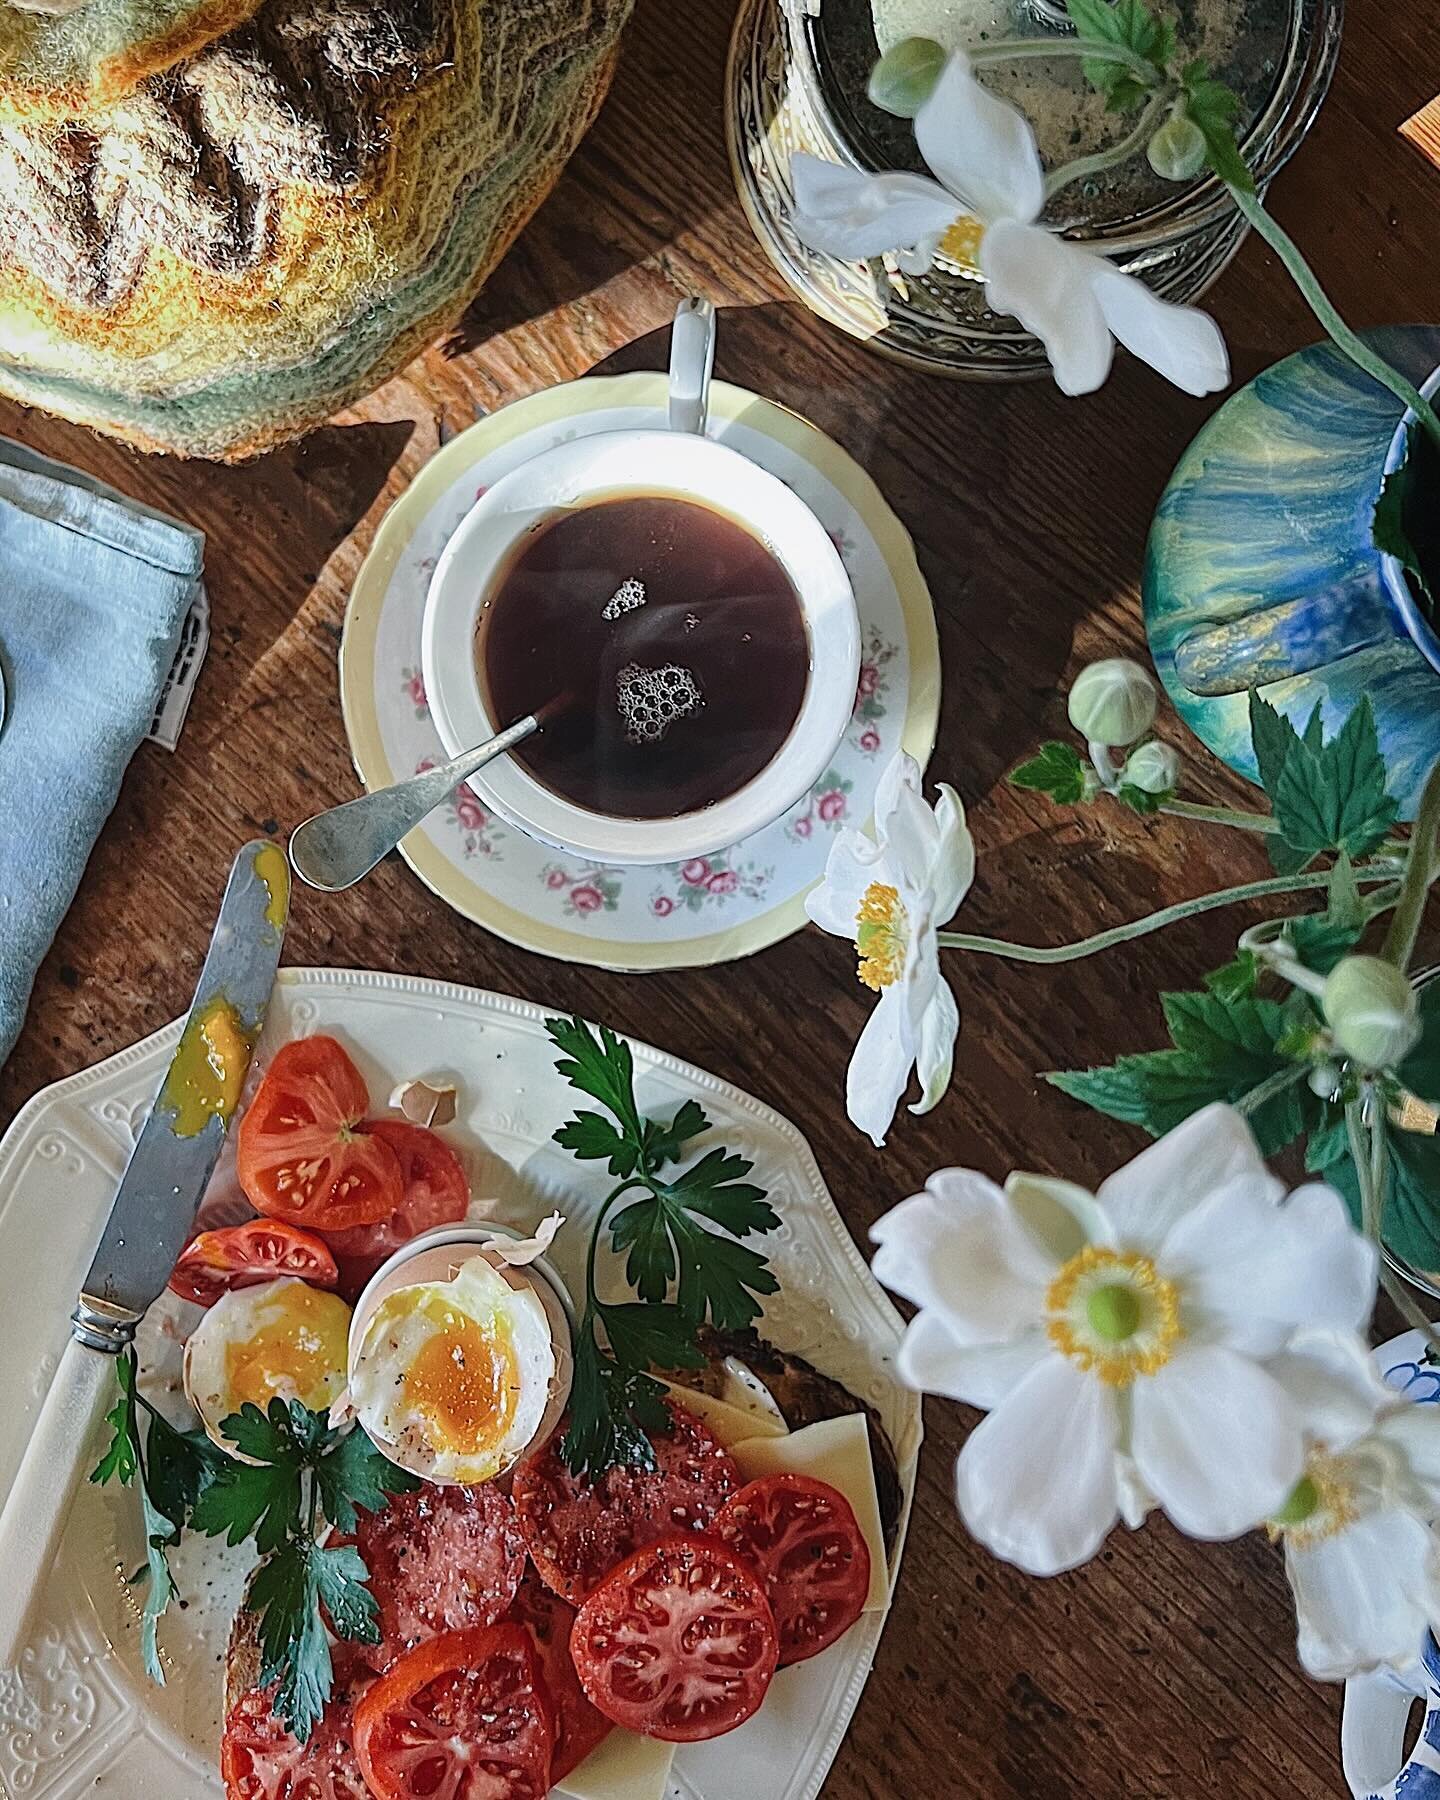 A messy brekkie table makes for a happy brekkie table ..

More in stories 🍅

#essingtonpark 
#essingtonparkshearersquarters 
#tomatoontoast 
#breakfast